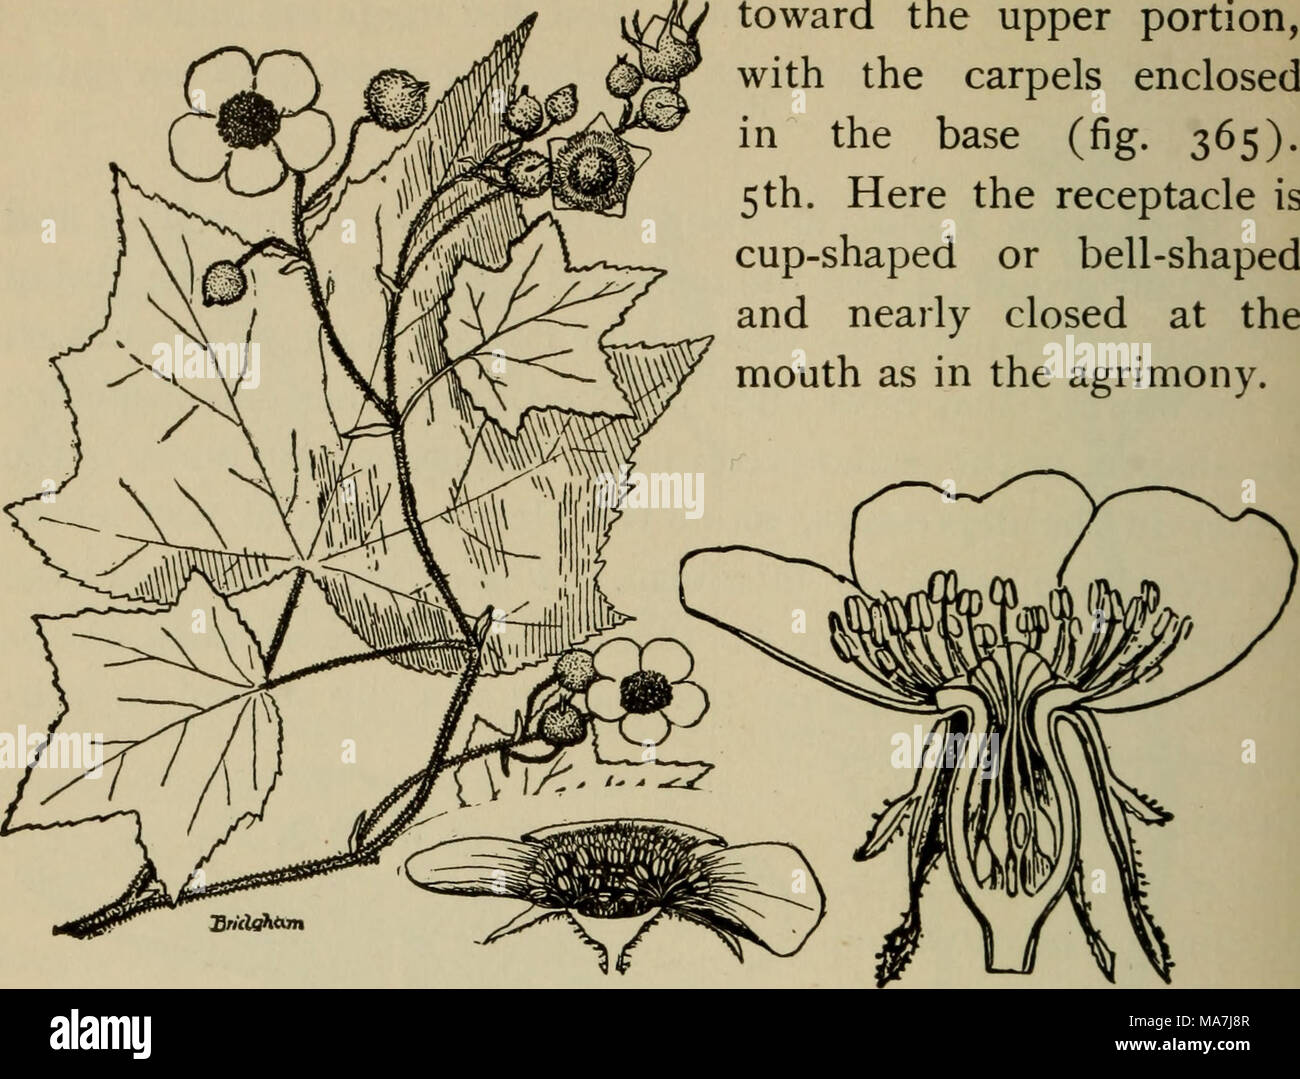 . Elementary botany . toward the upper portion, with the carpels enclosed in the base (fig. 365). 5 th. Here the receptacle is cup-shaped or bell-shaped and nearly closed at the mouth as in the agrimony. Fig. 364. Flowering raspberry (Rubus odoratus). Fig. 365- Perigynous flower of rosa, with contracted receptacle. (From Warming.) 532. Lesson XII. The almond or plum family (amygdala- ceae).—The members of this family are trees or shrubs. The common choke-cherry (fig. 366) will serve to represent one of the types. The flowers of this species are borne in racemes. The receptacle is cup-shaped. O Stock Photo